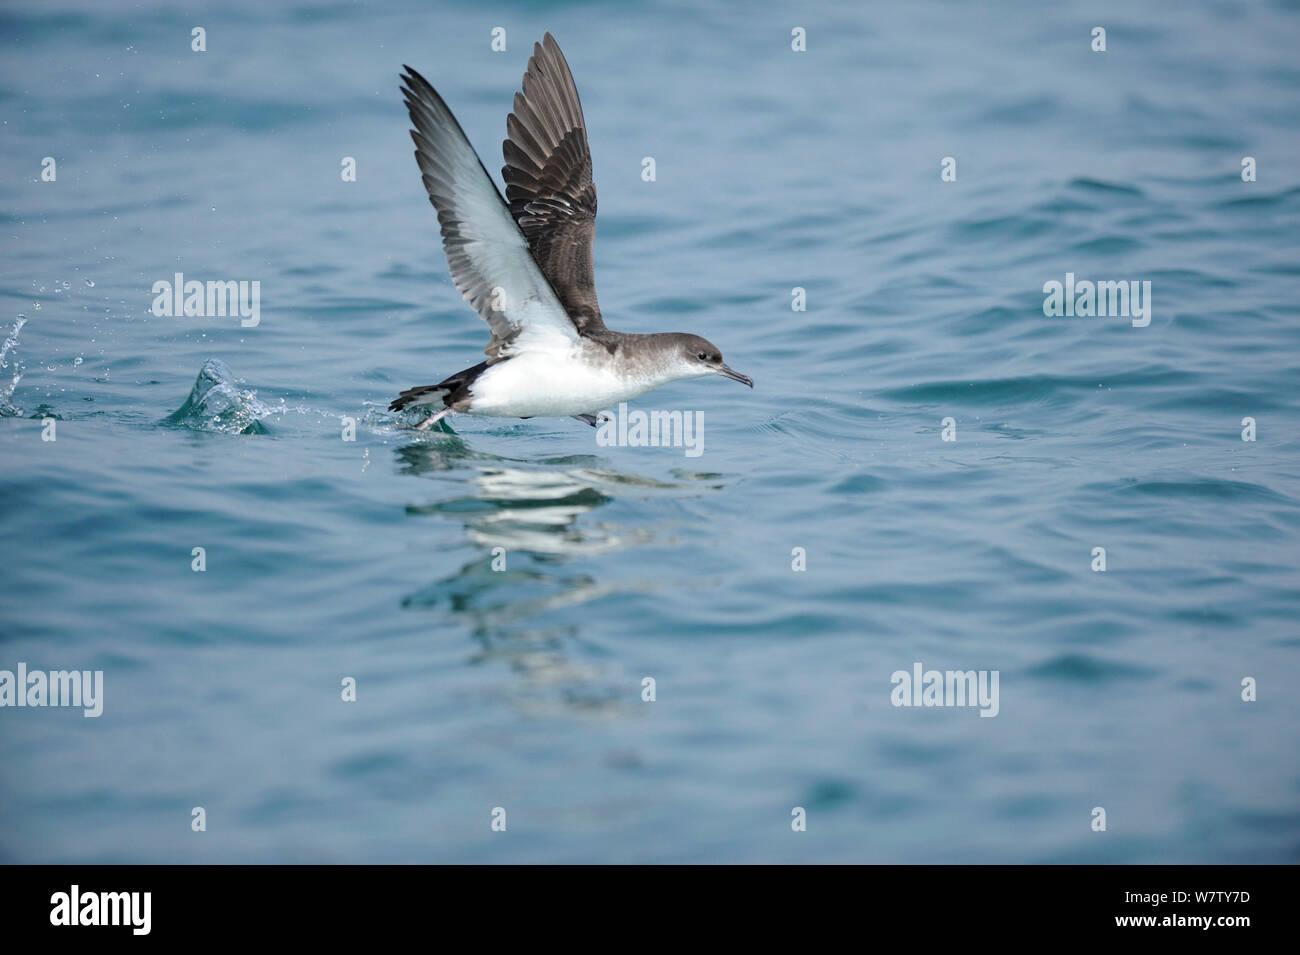 Manx Shearwater (Puffinus puffinus) taking off from calm sea, south coast of Anglesey, North Wales, UK. Stock Photo